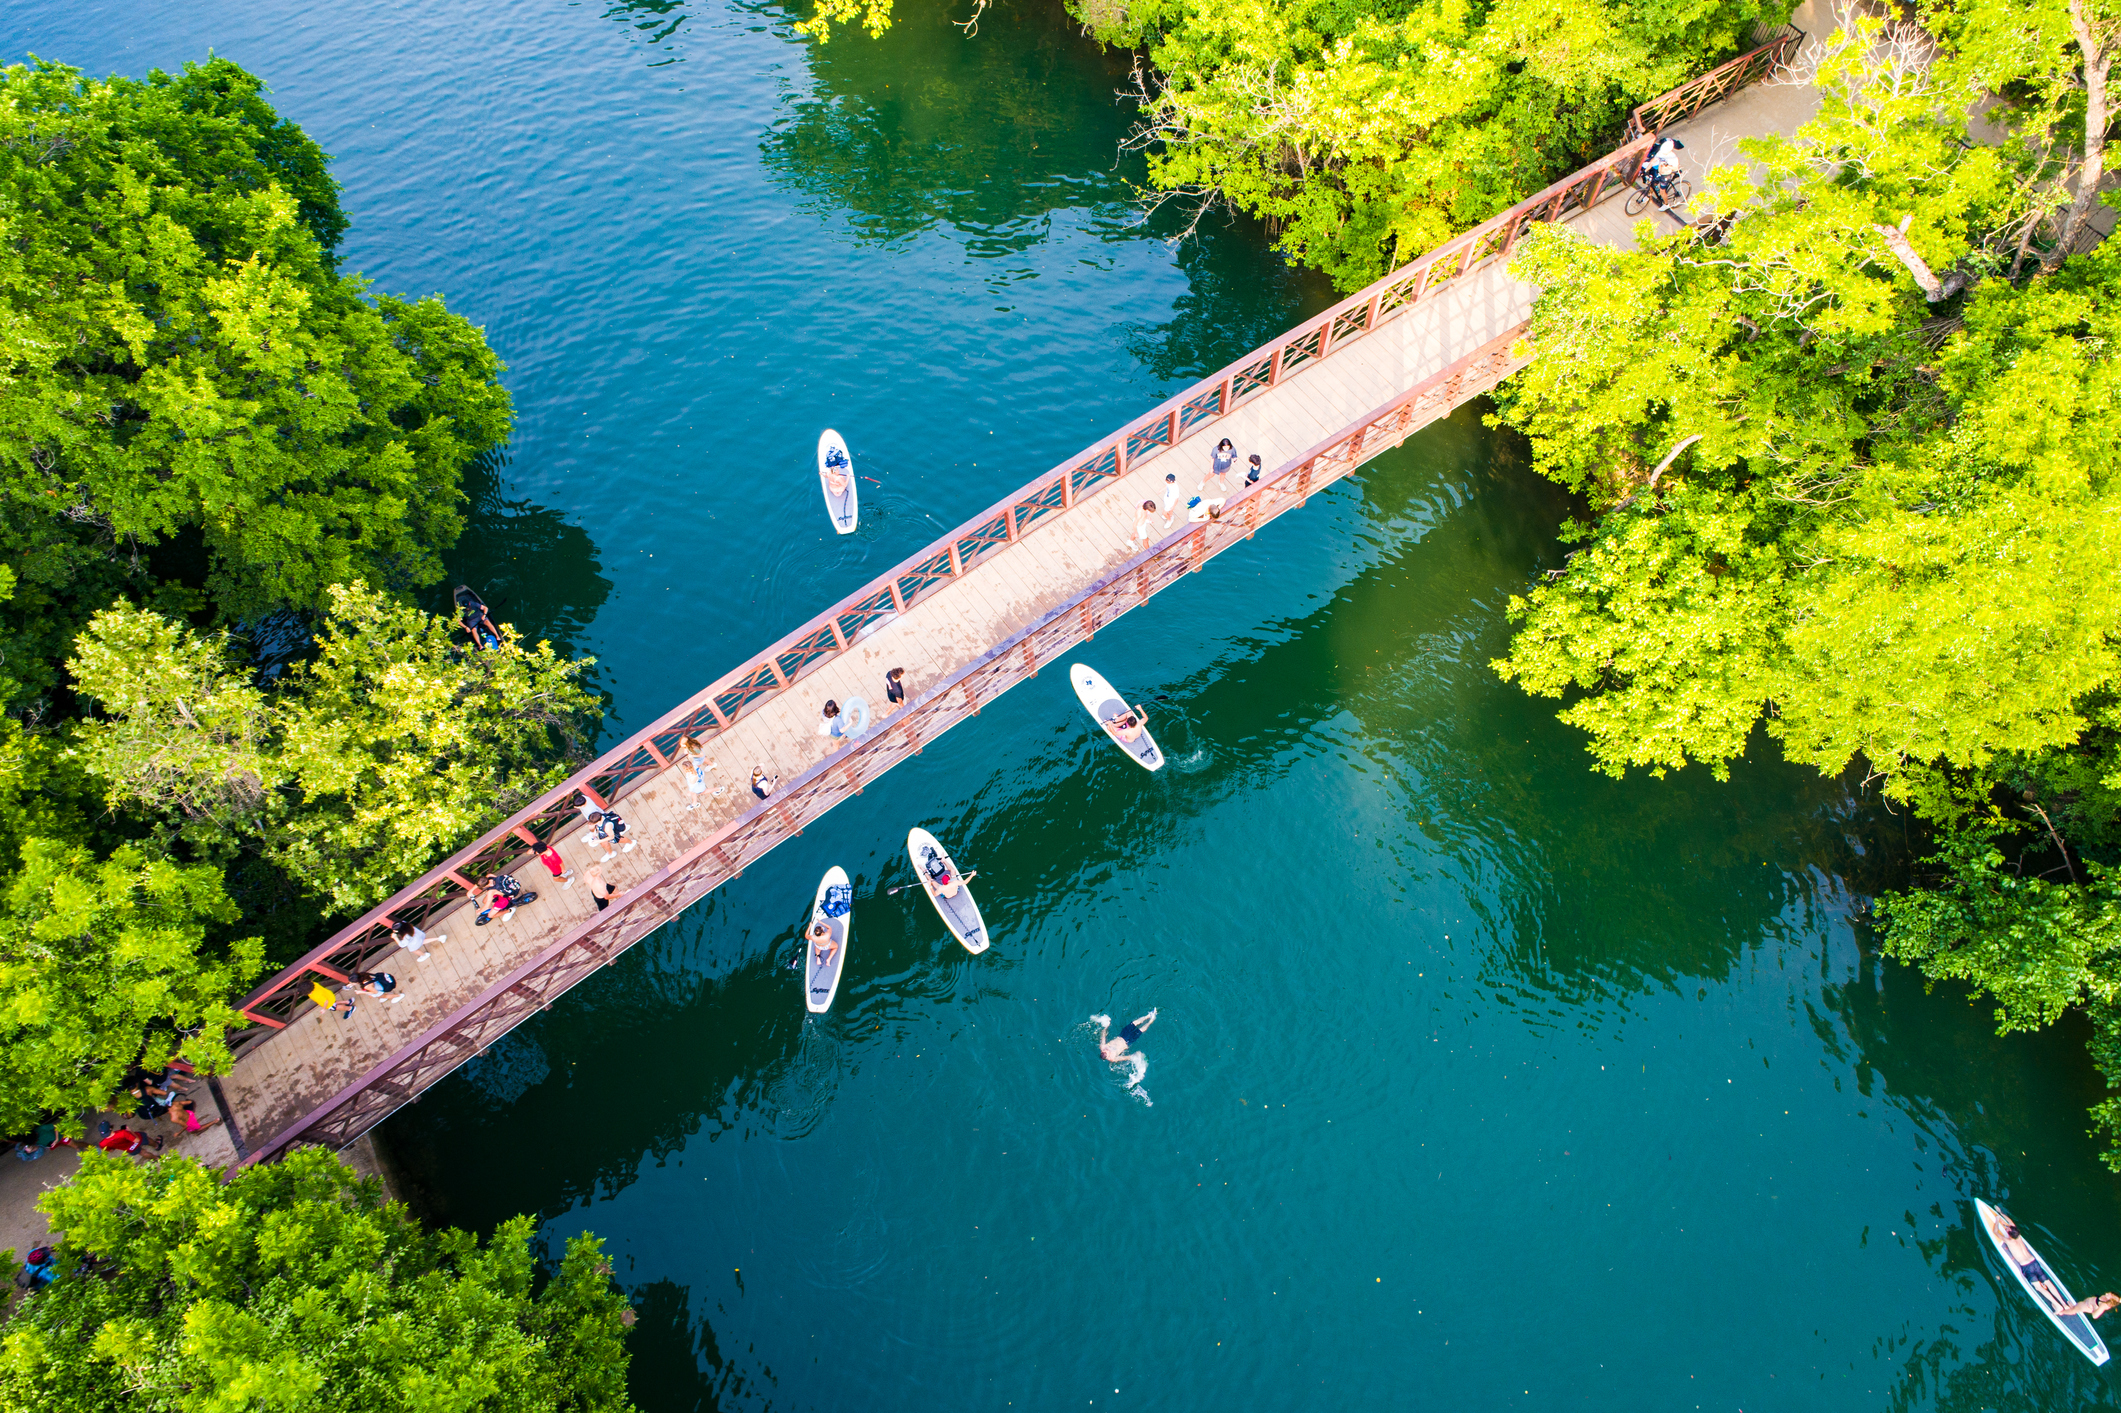 Go Two-Stepping - Relax at Barton Springs